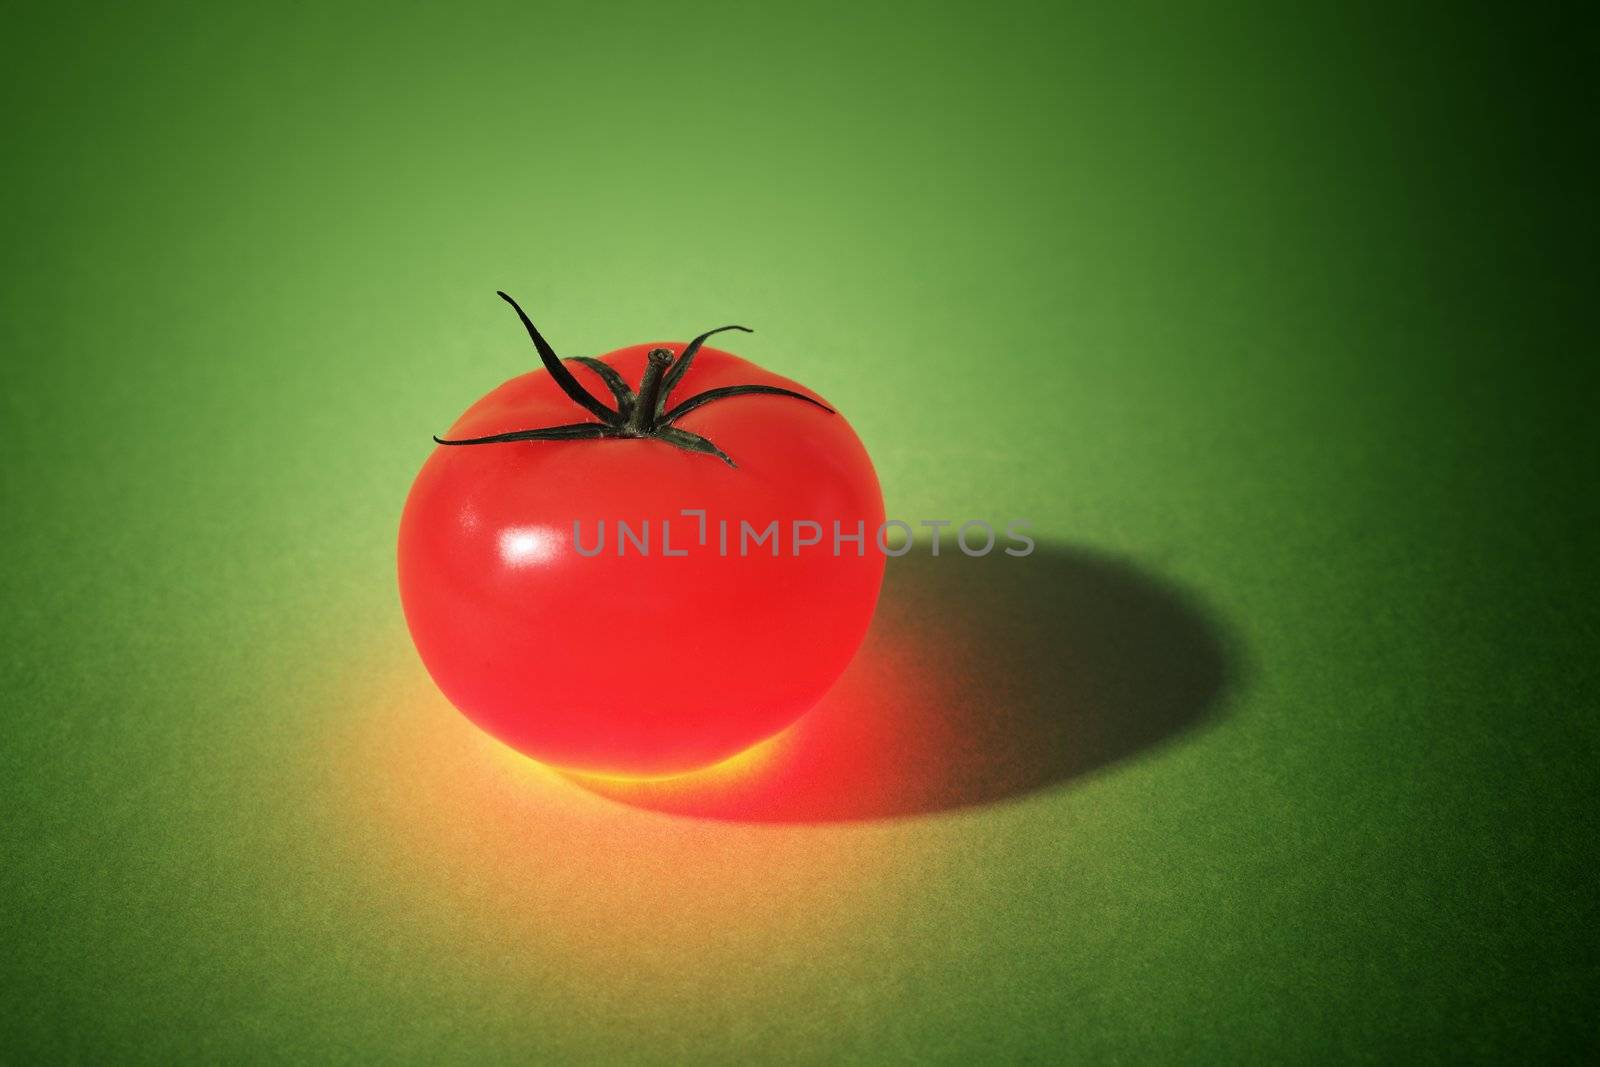 A Glowing Tomato on green background. Note that the background may appear noisy, but it's just the structure of the paper.